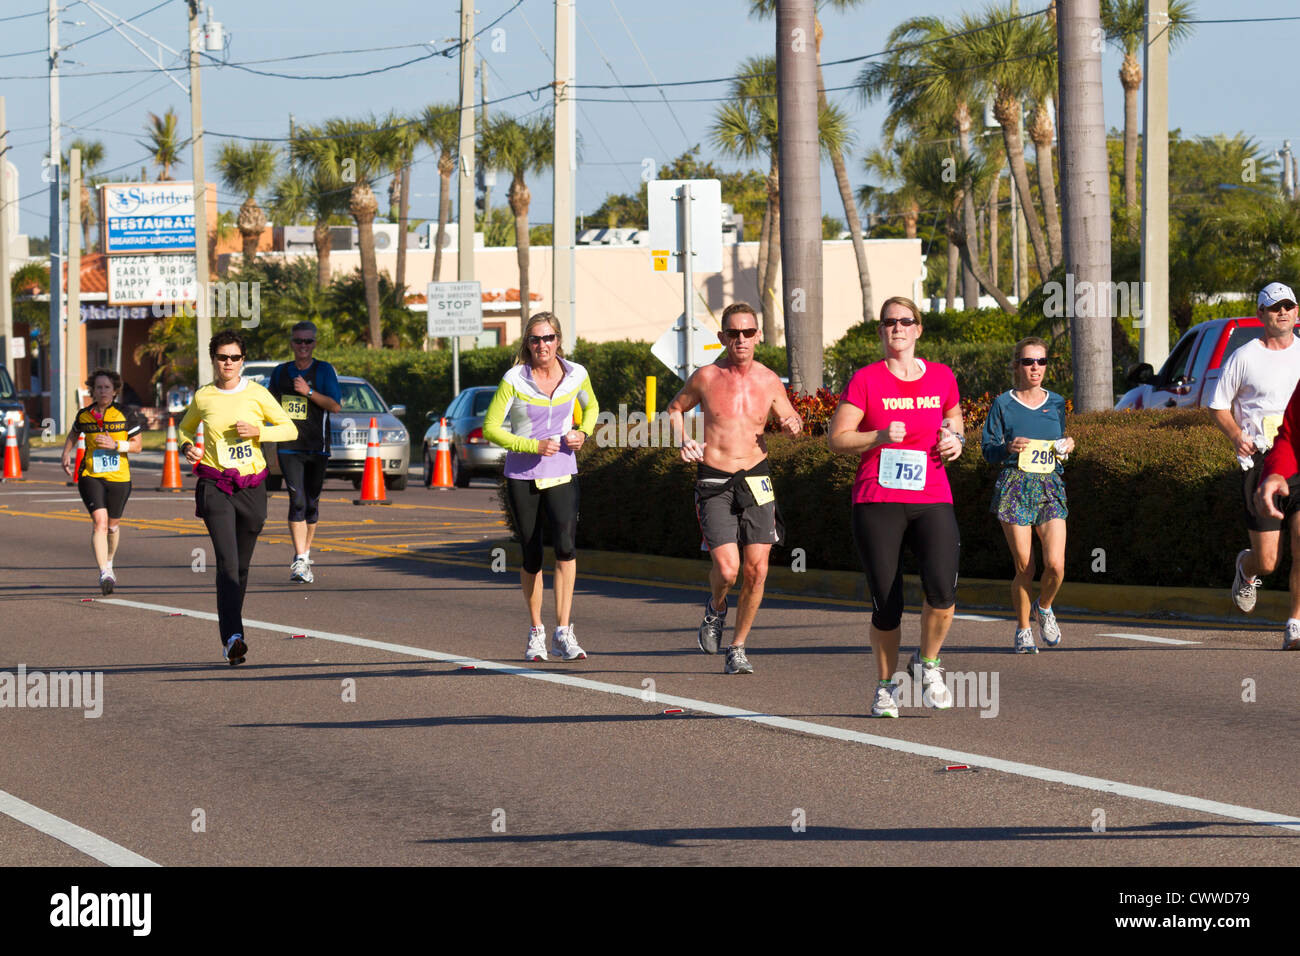 Men and women running in 5k and 10k run on streets of St. Pete Beach, Florida Stock Photo